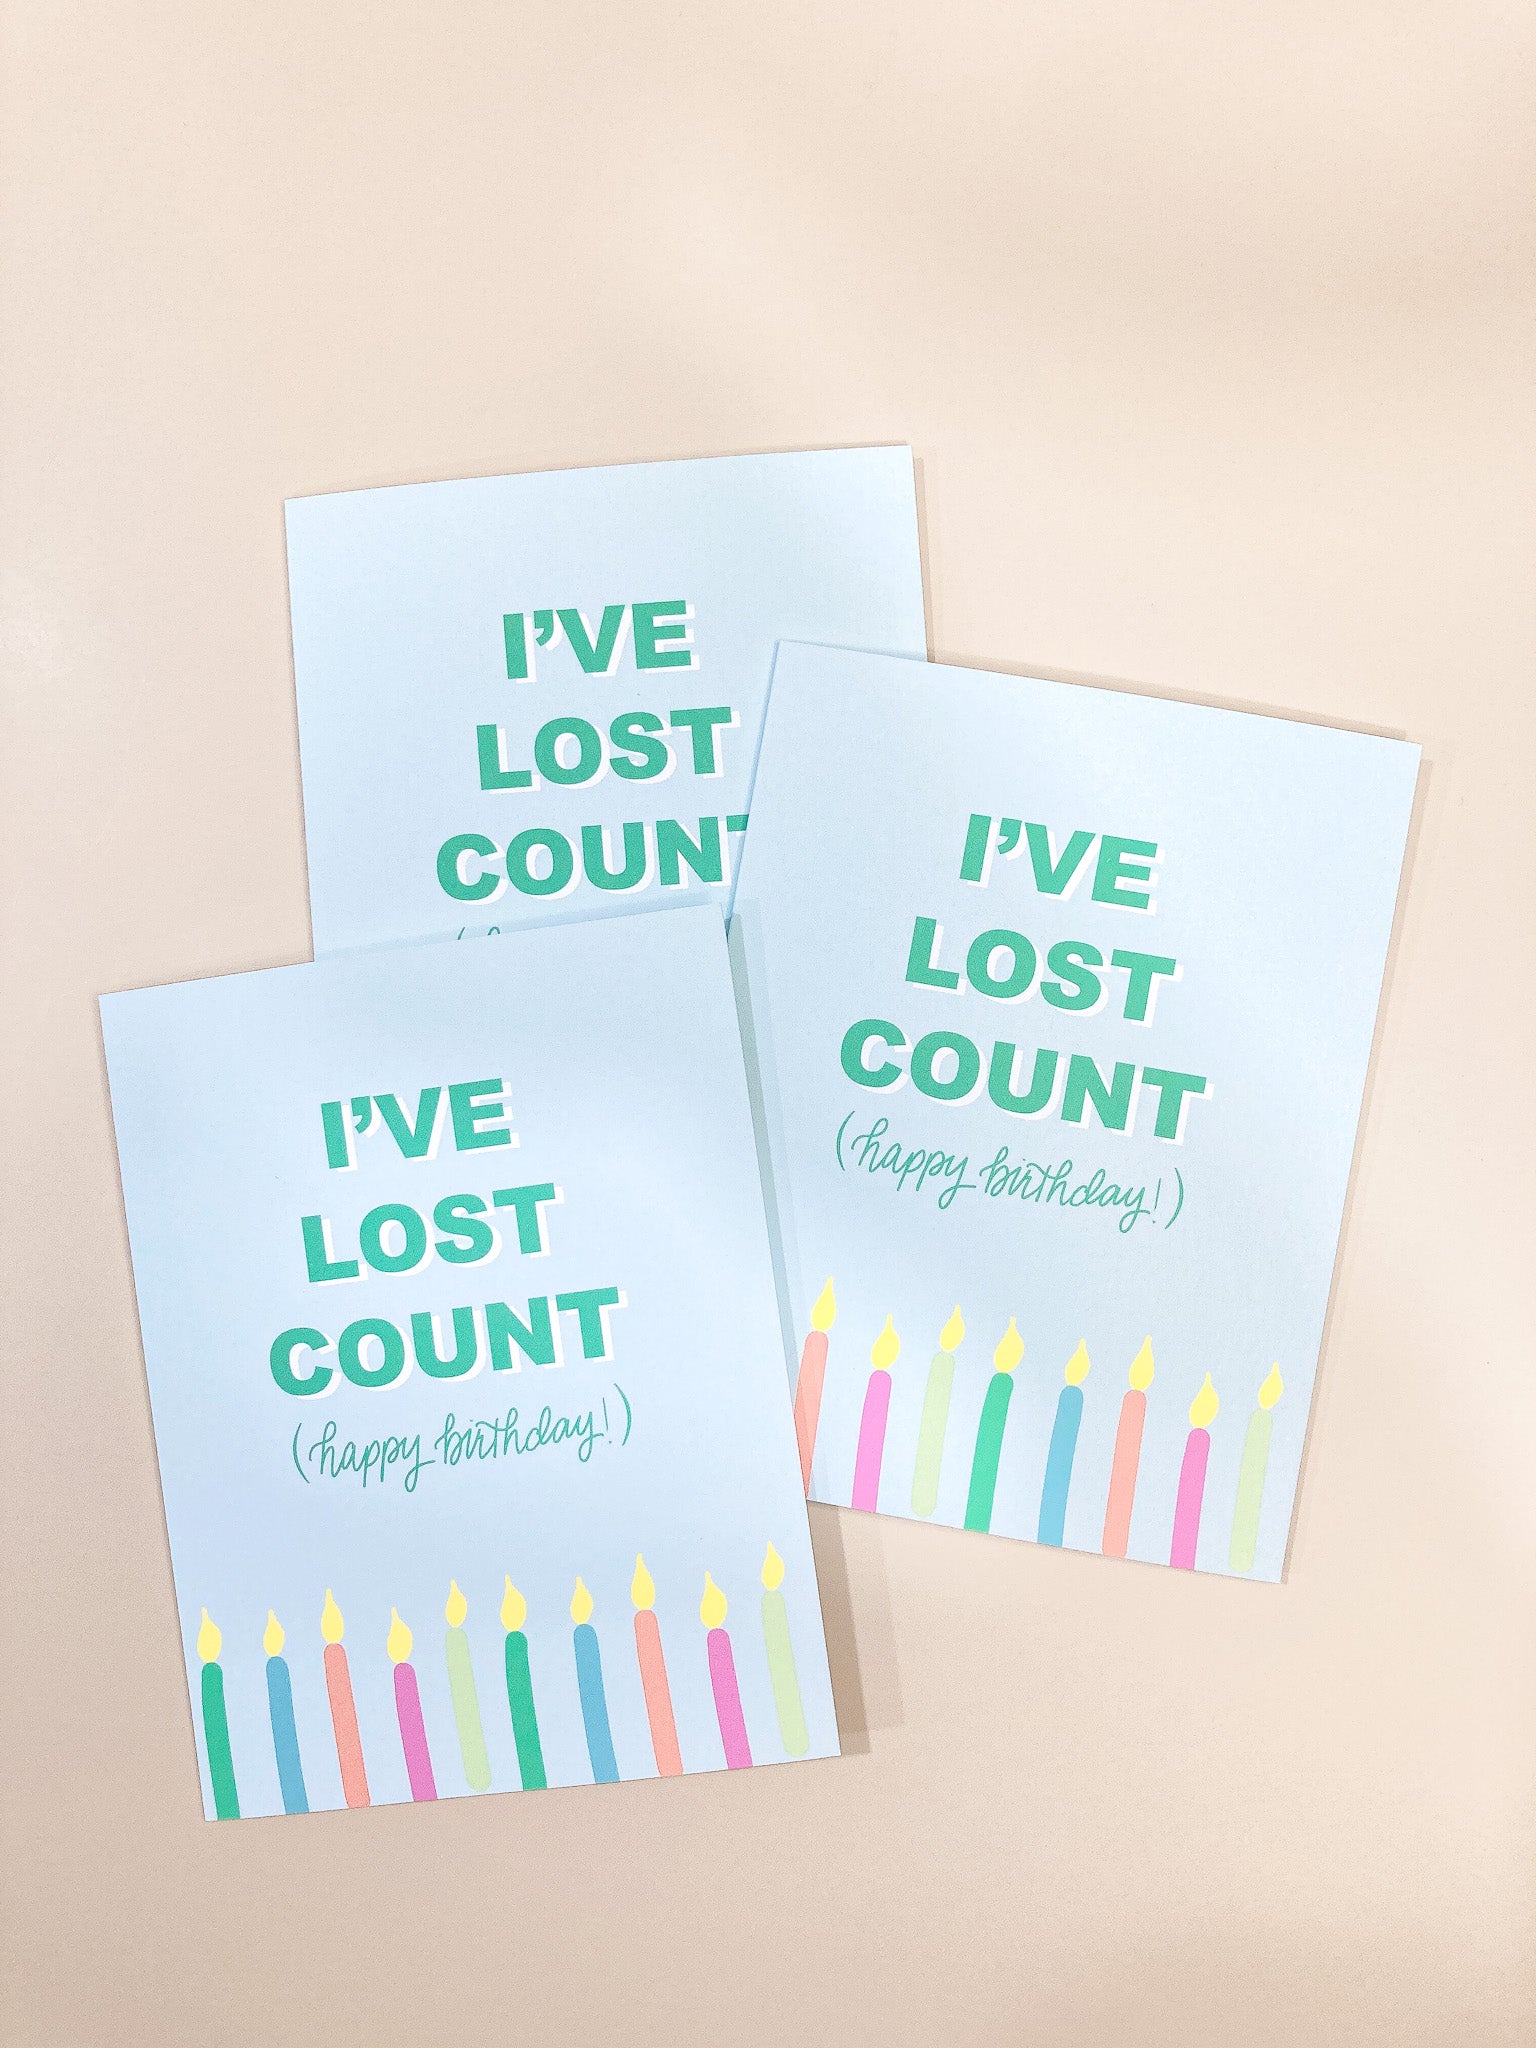 "I've lost count" birthday card is a simple but fun way to let someone know you are thinking about them on their special day.  Each card is folded to 4.25" tall by 5.5" wide, is blank inside and comes with a matching white envelope. Cards are packaged in cellophane sleeves.